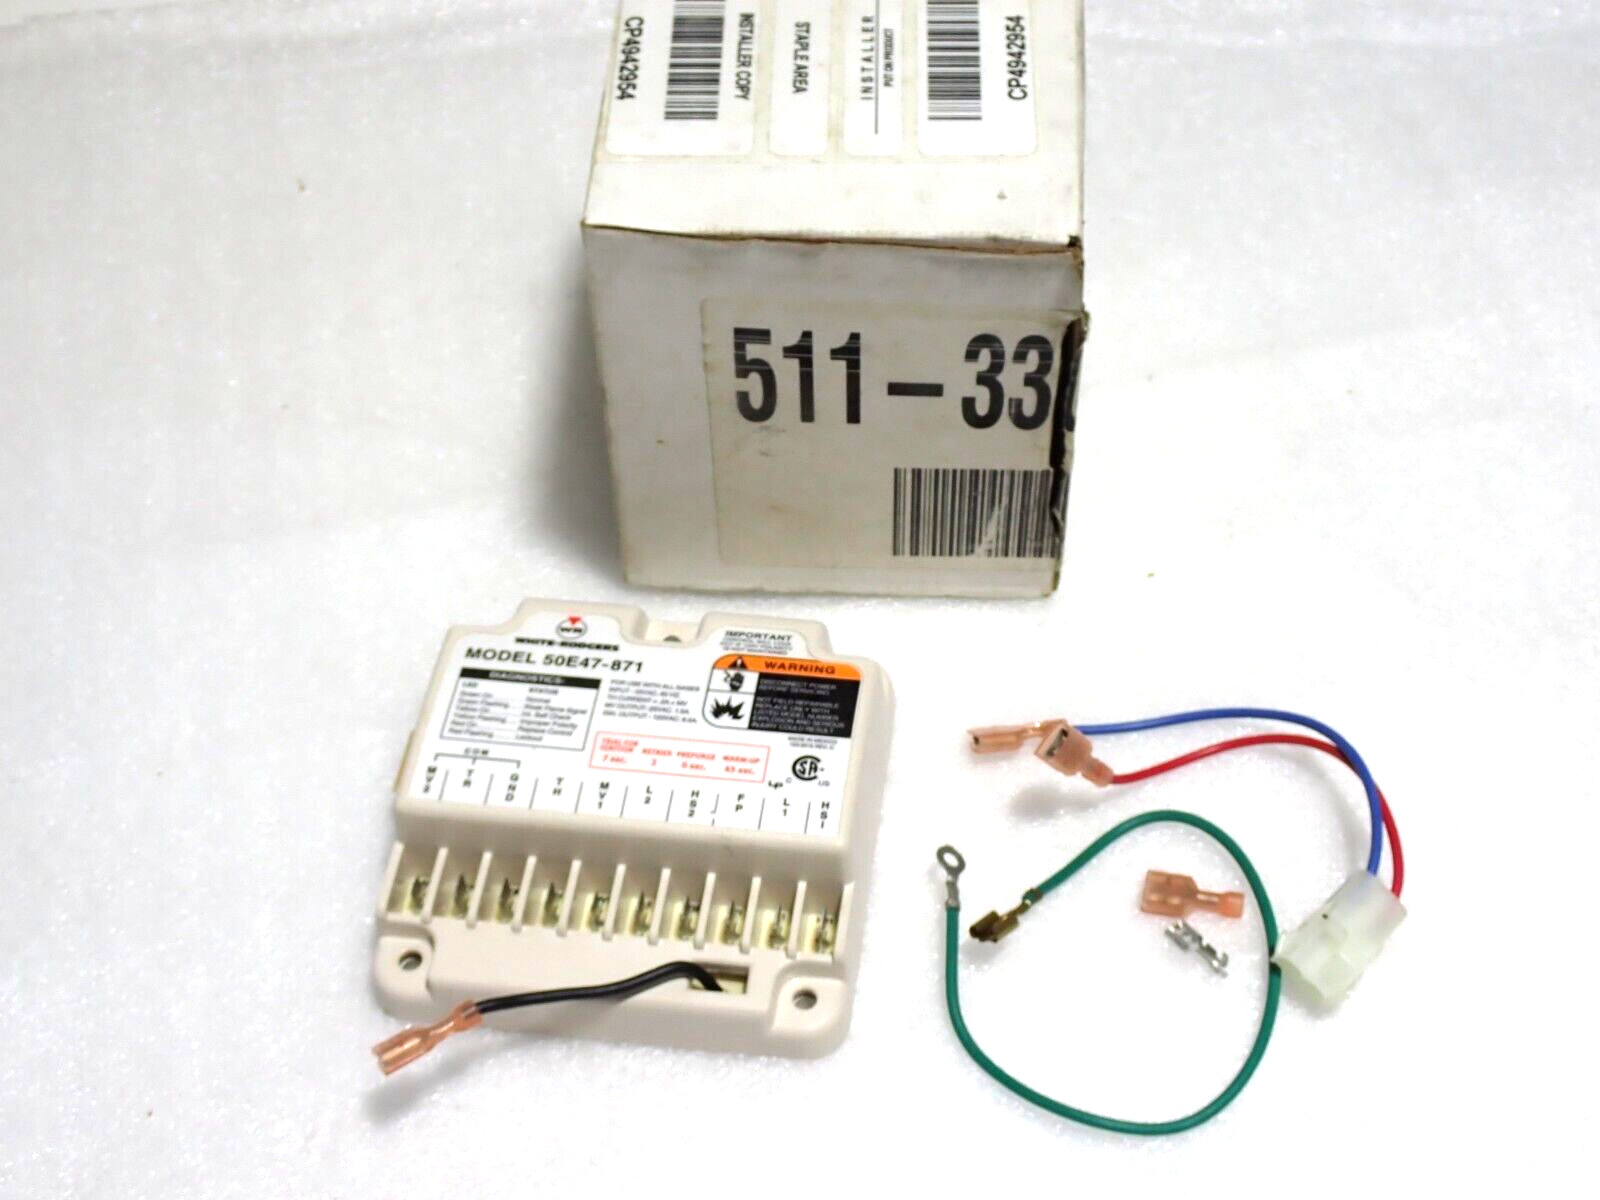 White Rodgers 50E47-871 Hot Surface Ignition Control NEW